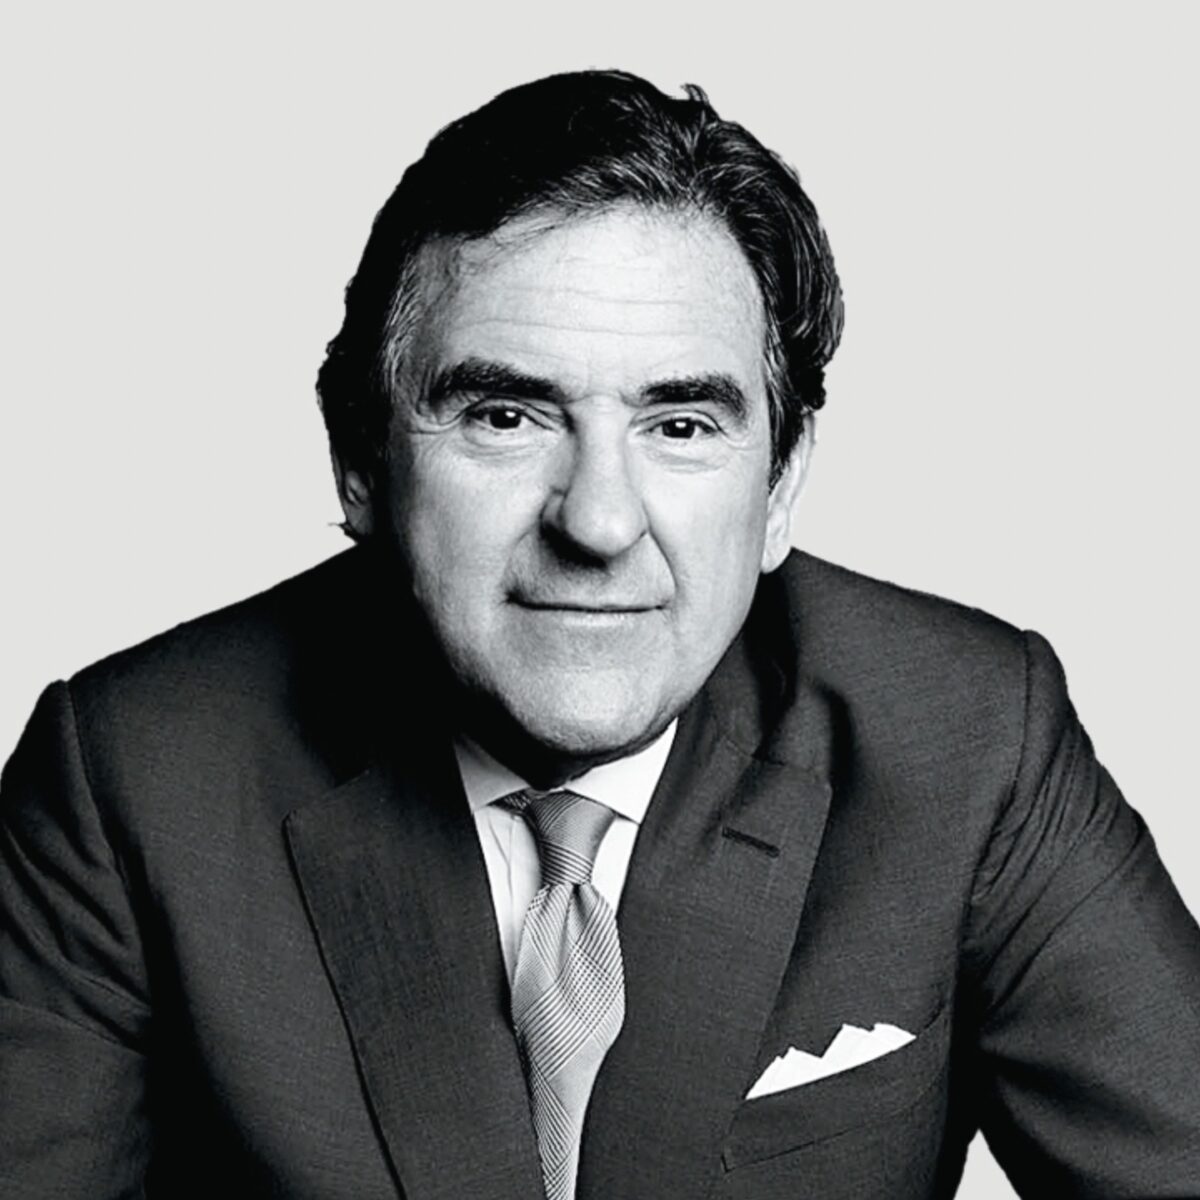 Portrait of Peter M Brant, art collector and newsprint tycoon.